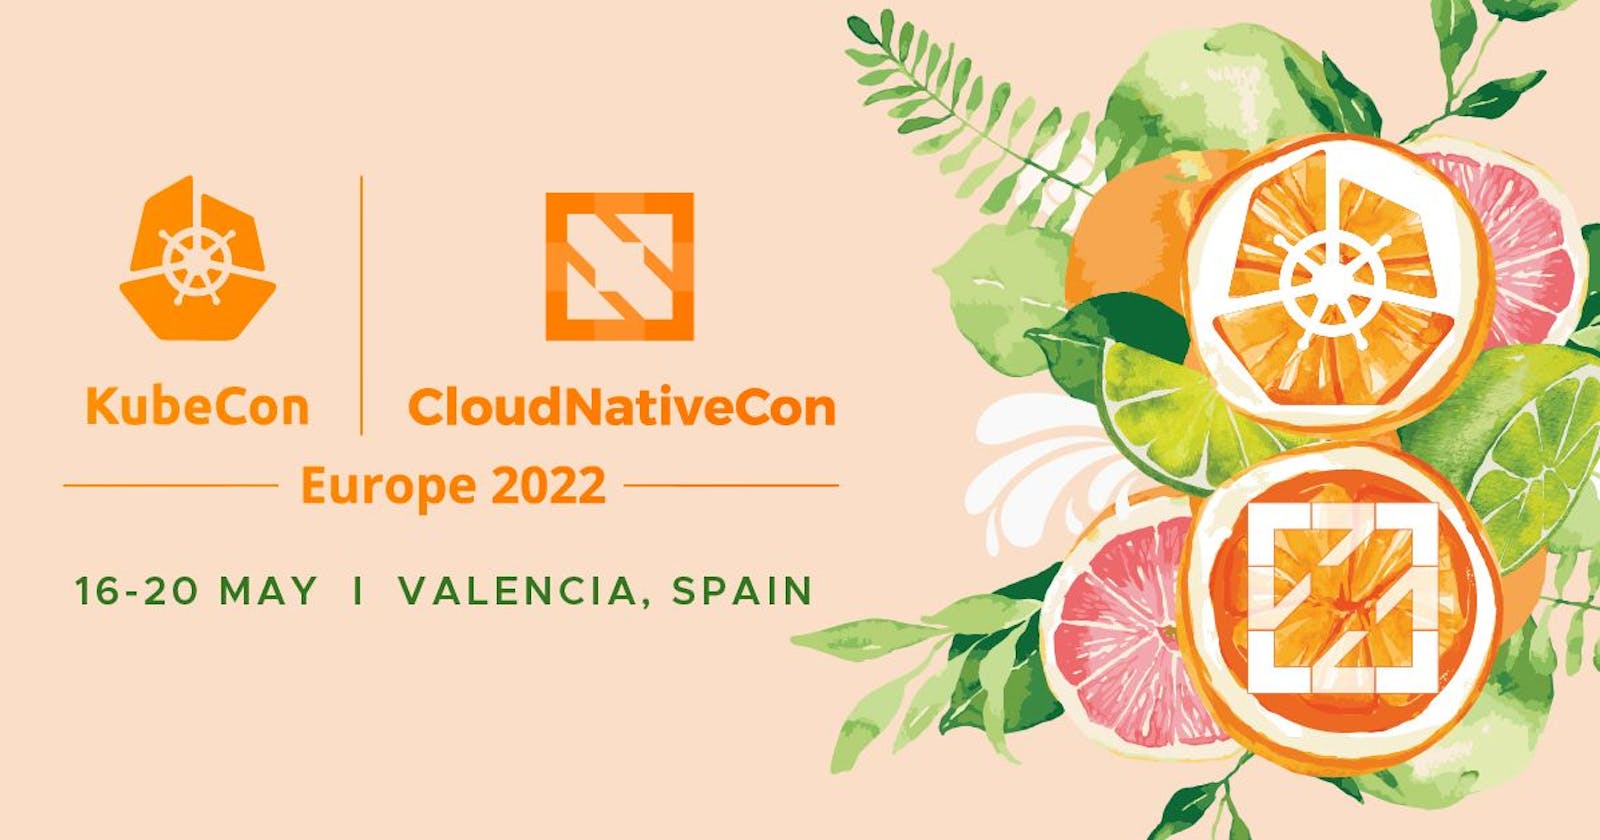 My Experience of Attending the KubeCon + CloudNativeCon 2022 (In-person) for the first time